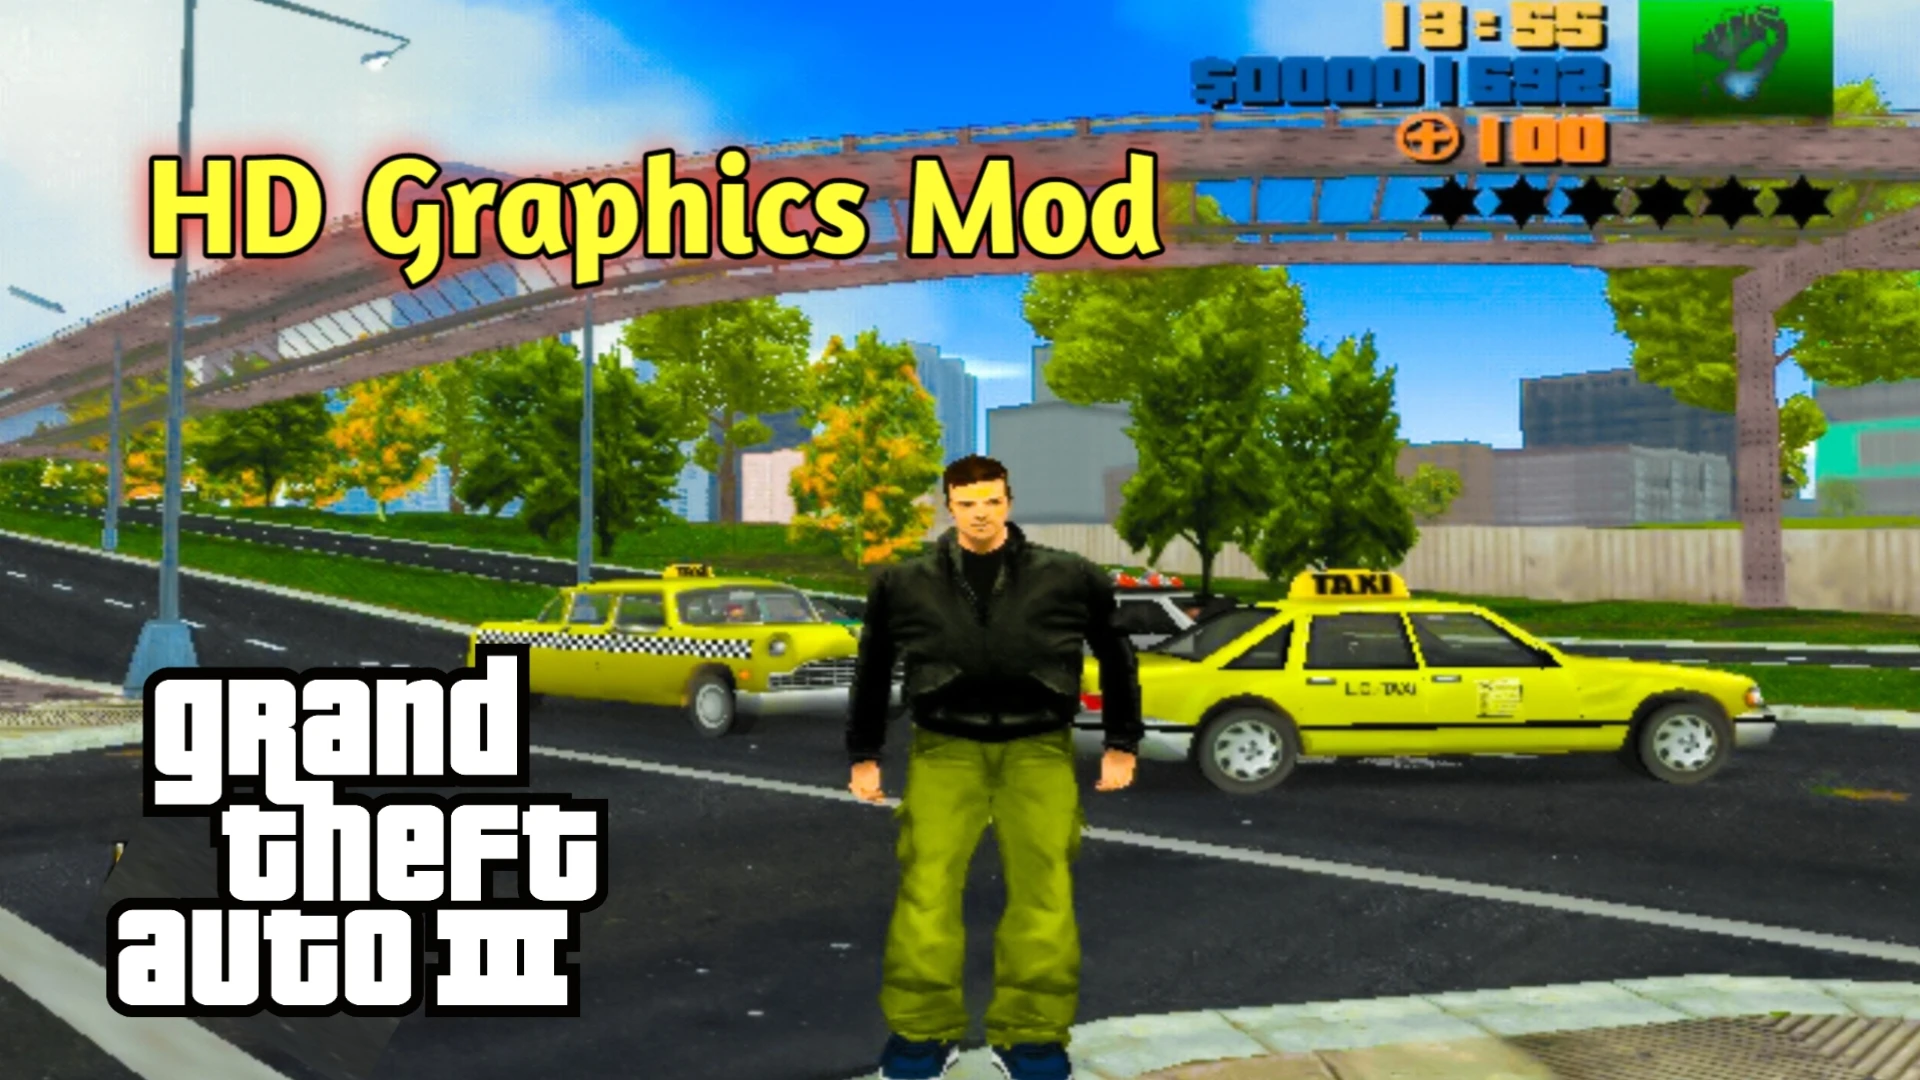 GTA 3 vs GTA Vice City graphics: Which game has better visuals?